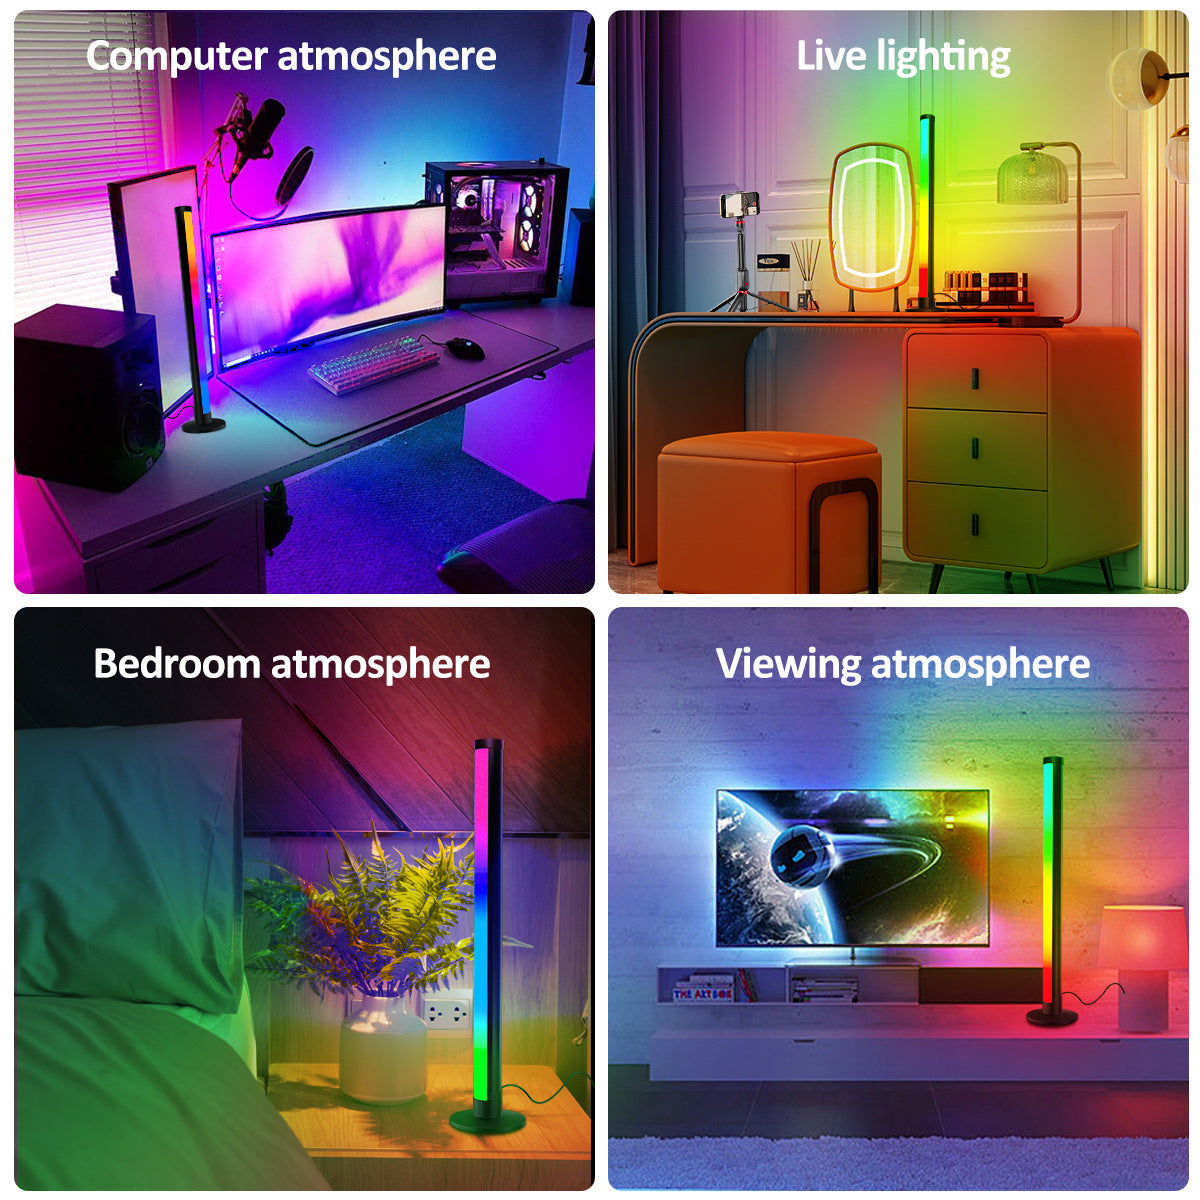 LED Magic 48-Colors Desktop Lights USB Interface 2.4G Atmosphere Light E-Sports Music Color Lights for Computer and TV with Remote Control - CALCUMART